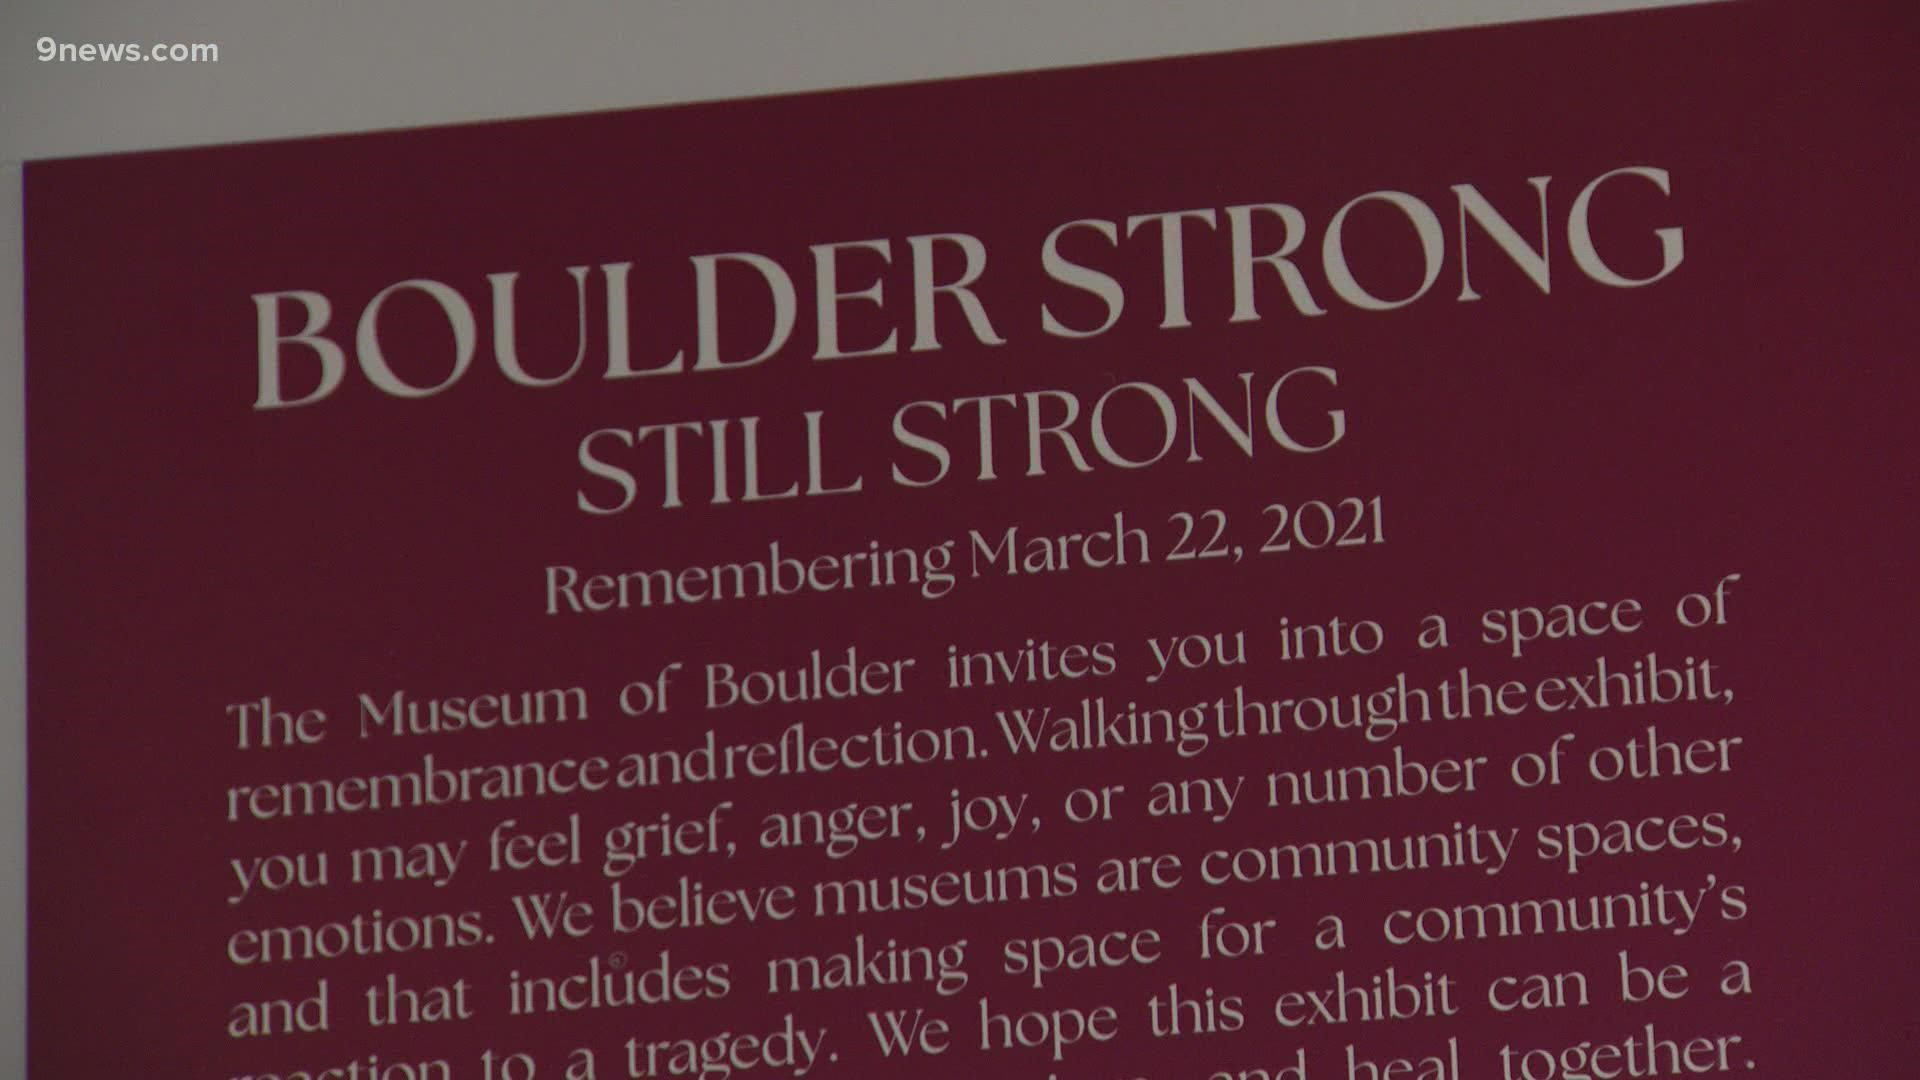 3/22/22 marks one year after 10 lives were lost in a King Soopers. The Museum of Boulder recently opened an exhibit called organizers hope is a place for healing.